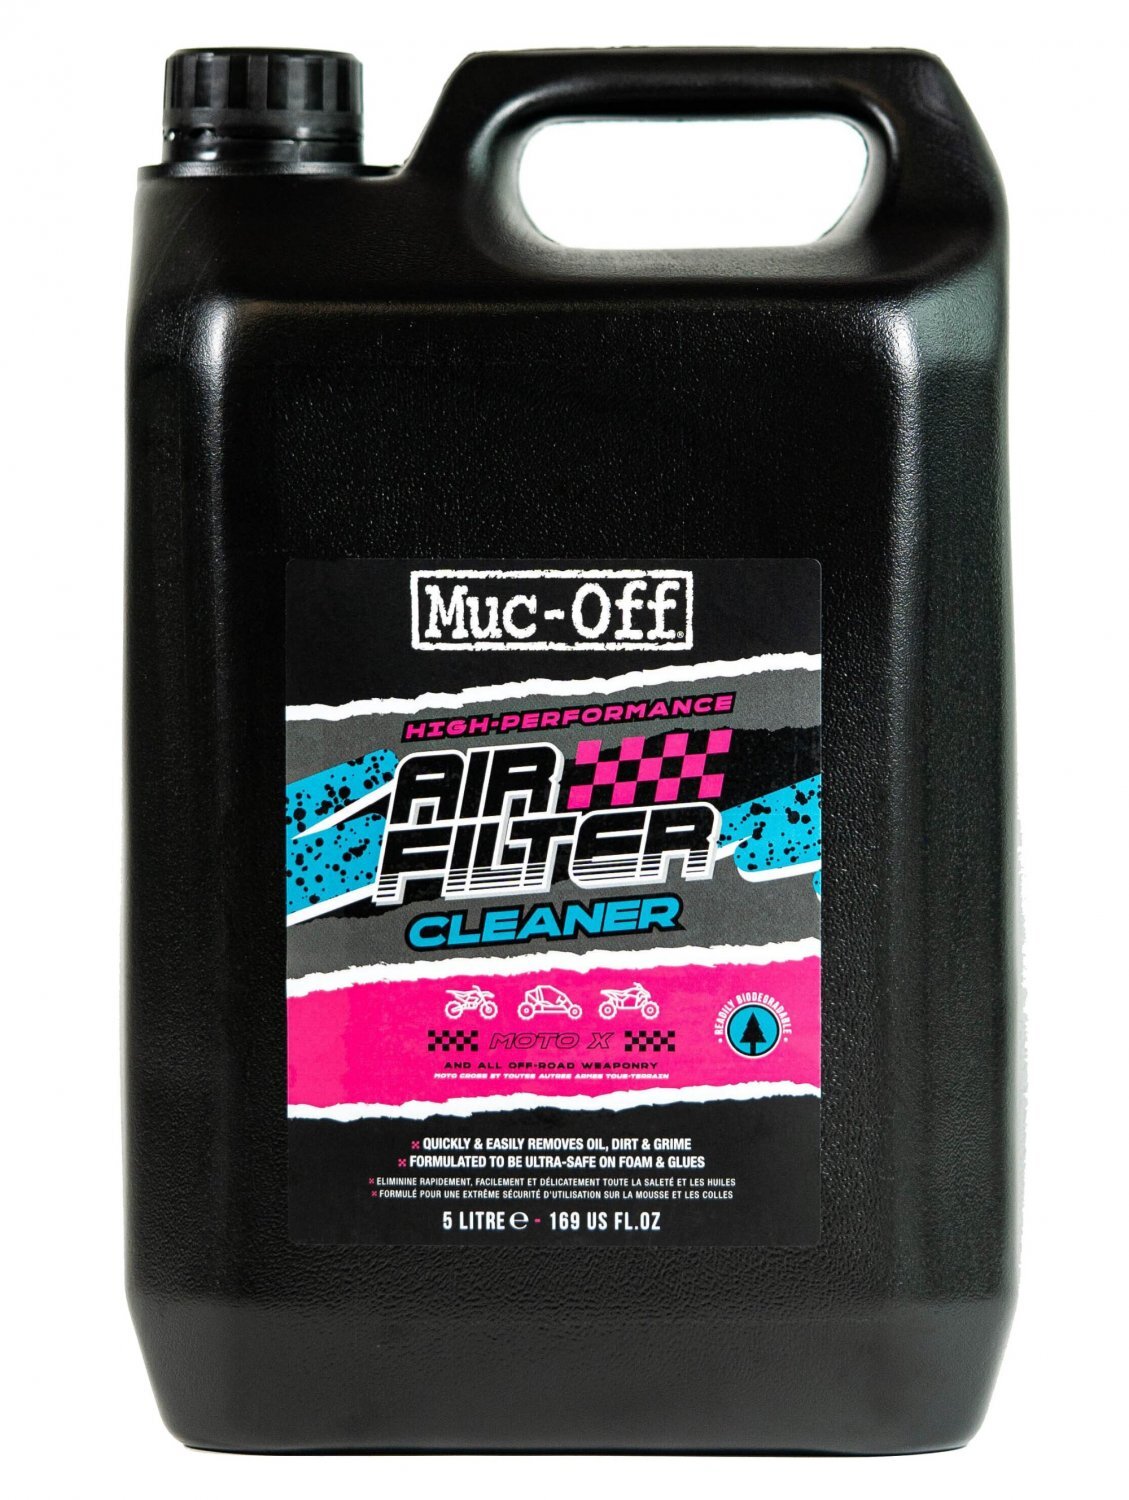 MUC-OFF MOTORCYCLE BIODEGRADABLE AIR FILTER CLEANER 5L